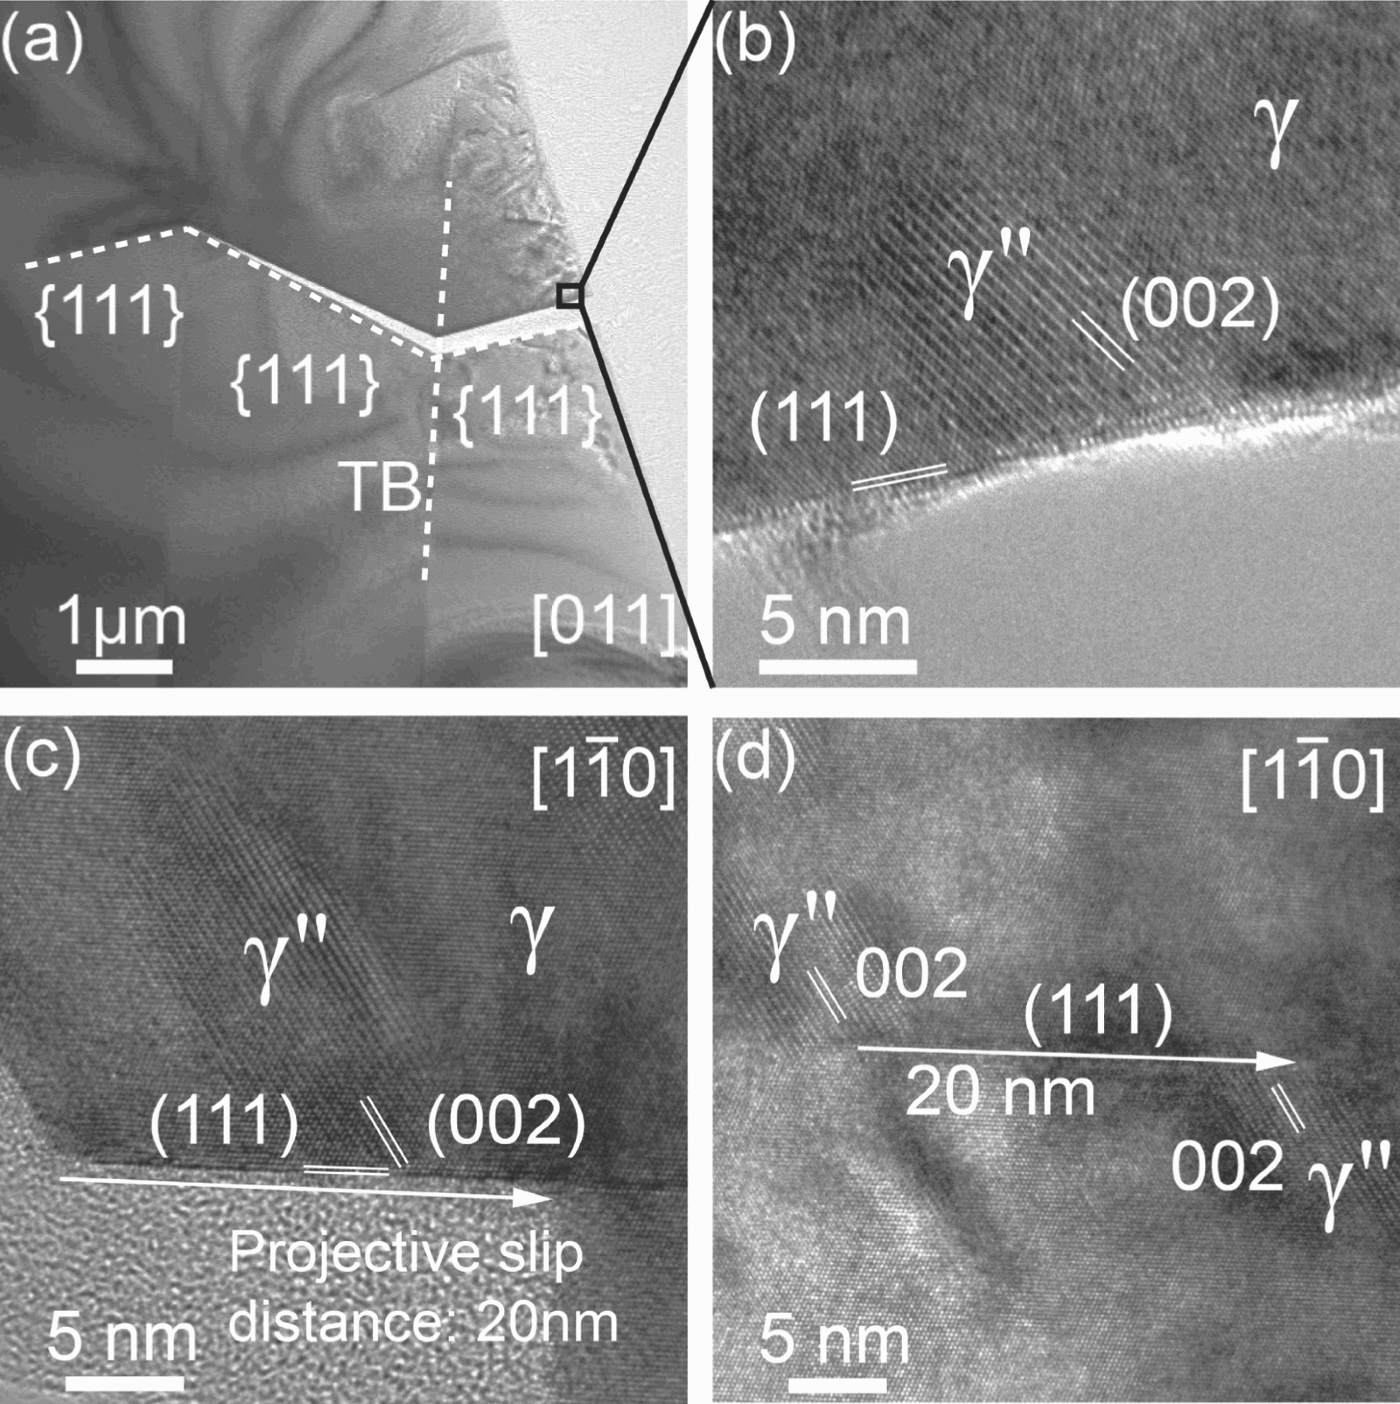 Figure 2. (a) TEM image showing a crack propagating in alloy 725 along {111} planes across two twin boundaries. (b) High-resolution TEM image of the crack surface indicated by a black square in (a) contains part of a γ″ precipitate. (c) A nanoscale surface notch with slip displacement of 20 nm along the (111) plane. (d) A γ″ precipitate ahead of the notch shown in (c) that has been cut into two halves along the same (111) plane forming the notch. The amorphous structures above the scale bar in (b) and below the arrow in (c) are organic contaminants.